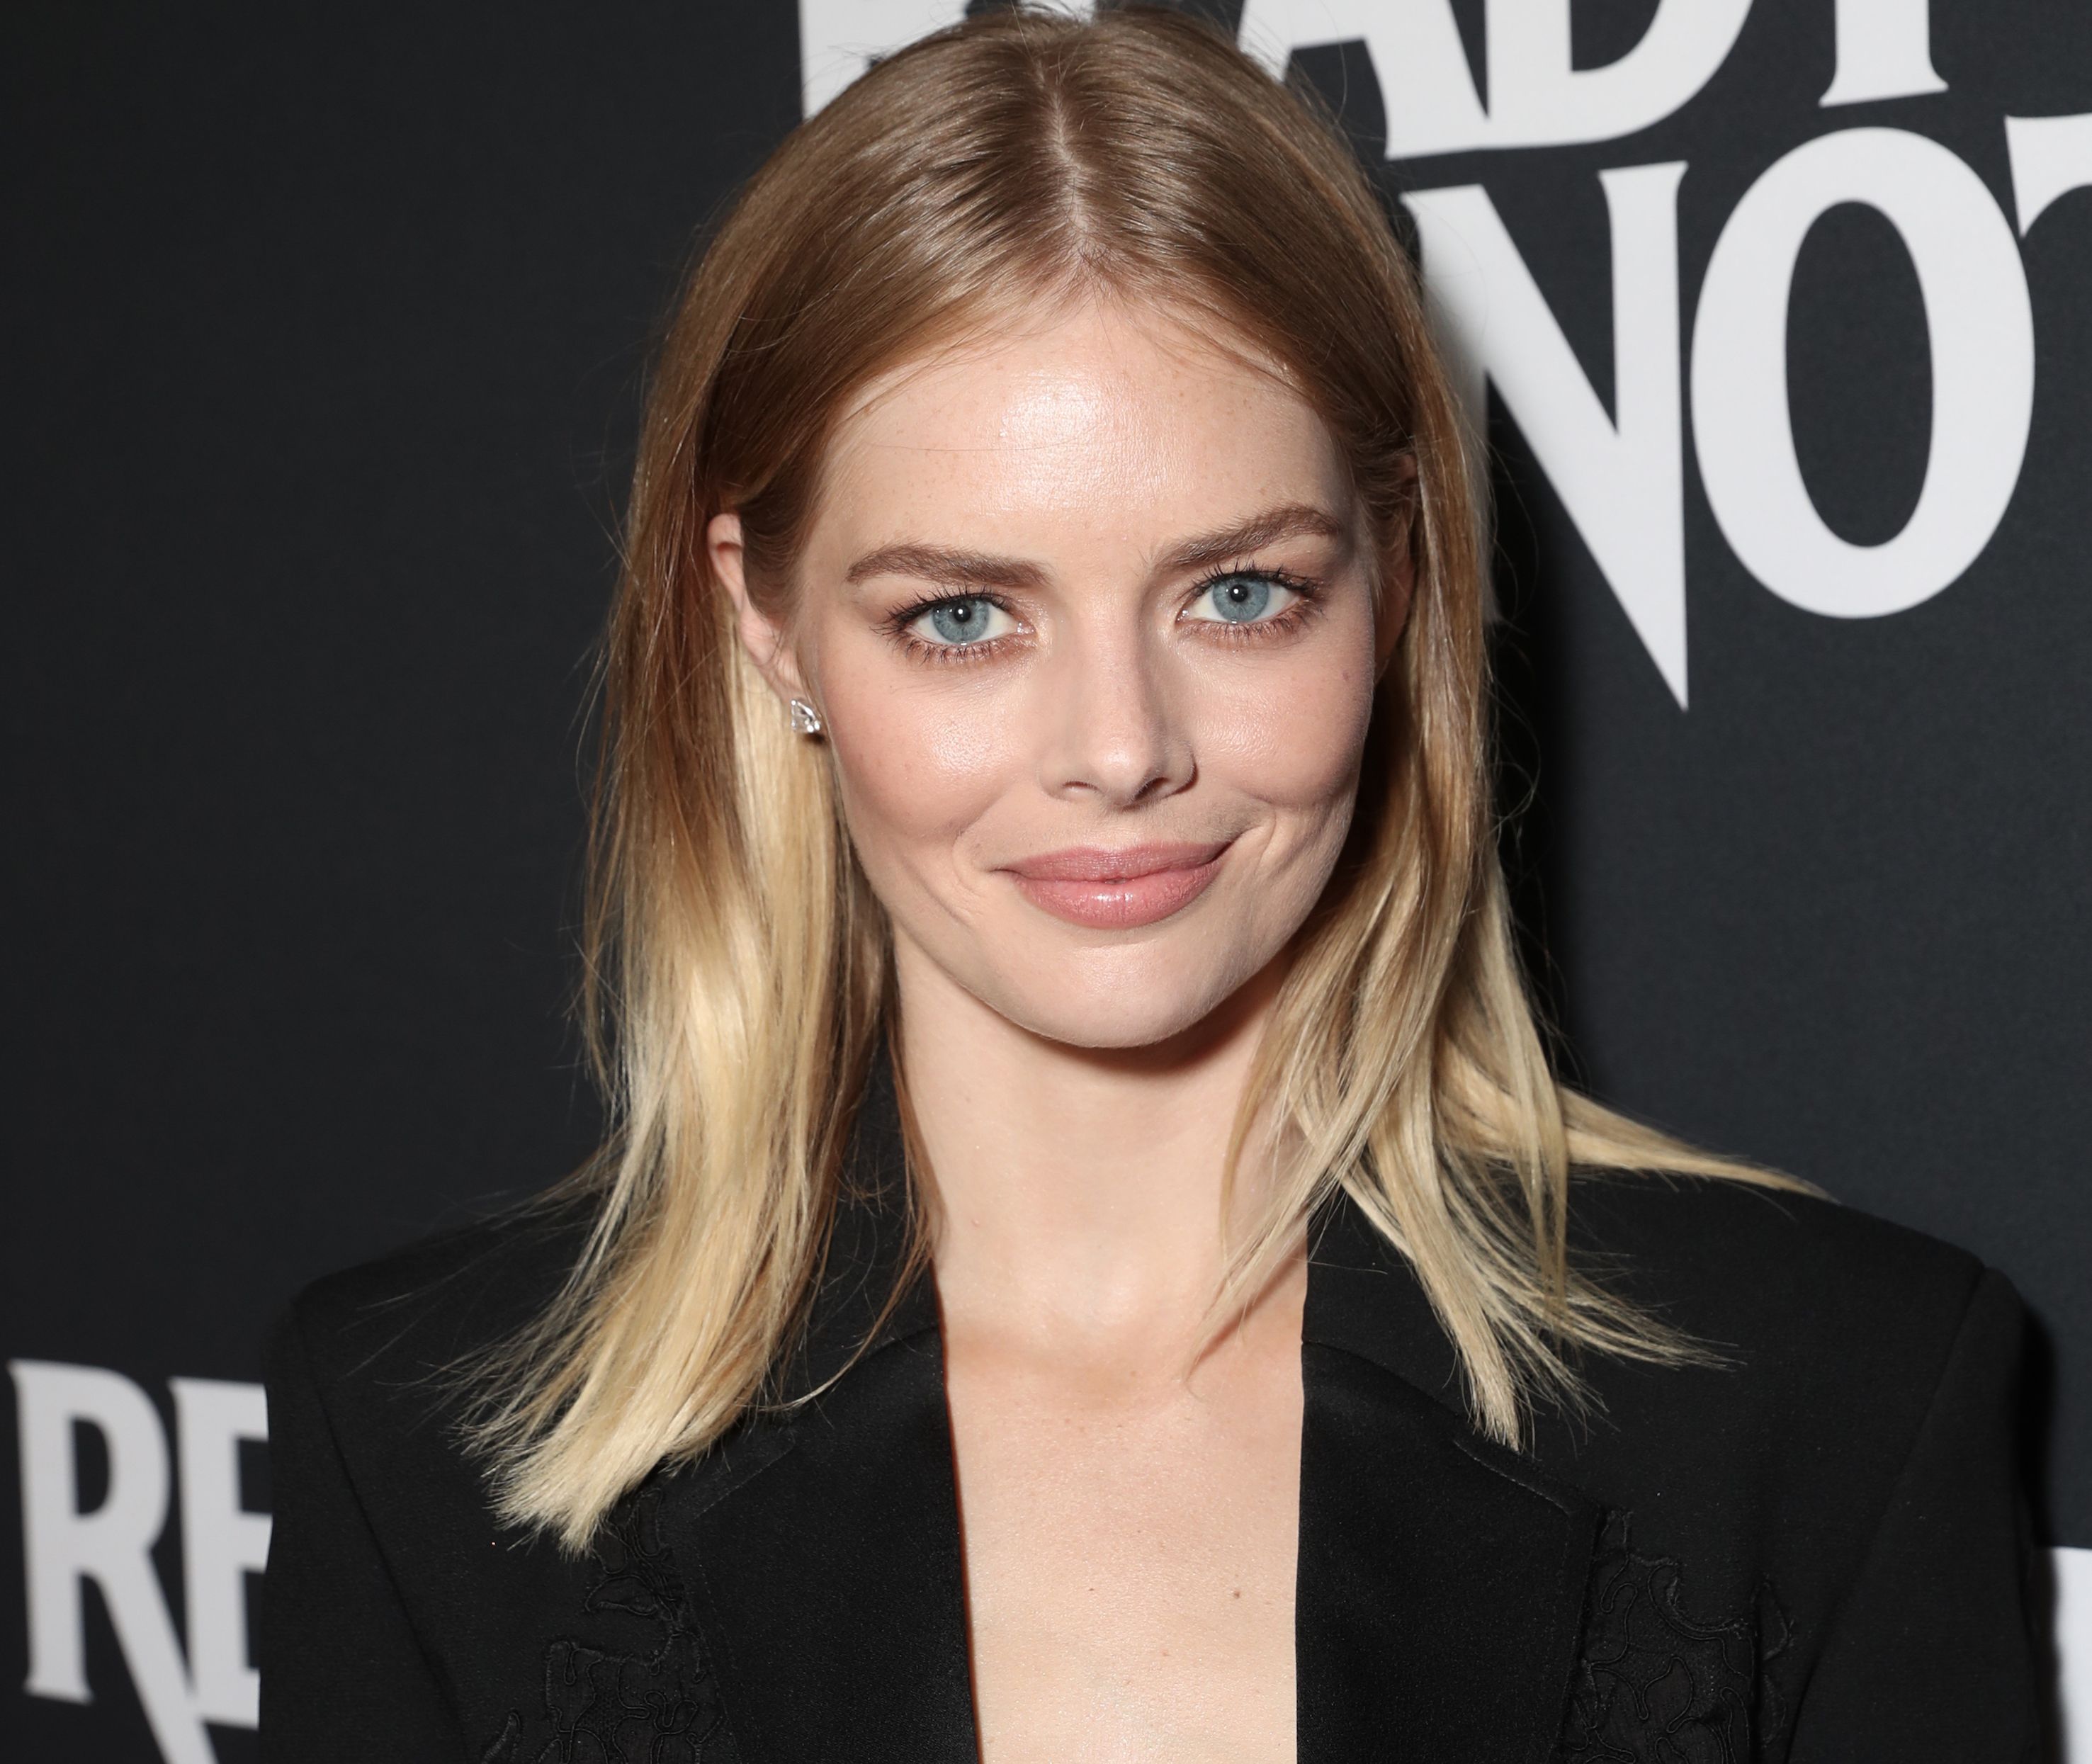 Everyone's saying that Samara Weaving, is making a star turn in Ready or Not! HolaHollywood.com by Dulce Osuna, was there to witne. Samara, Beauty, Beautiful eyes